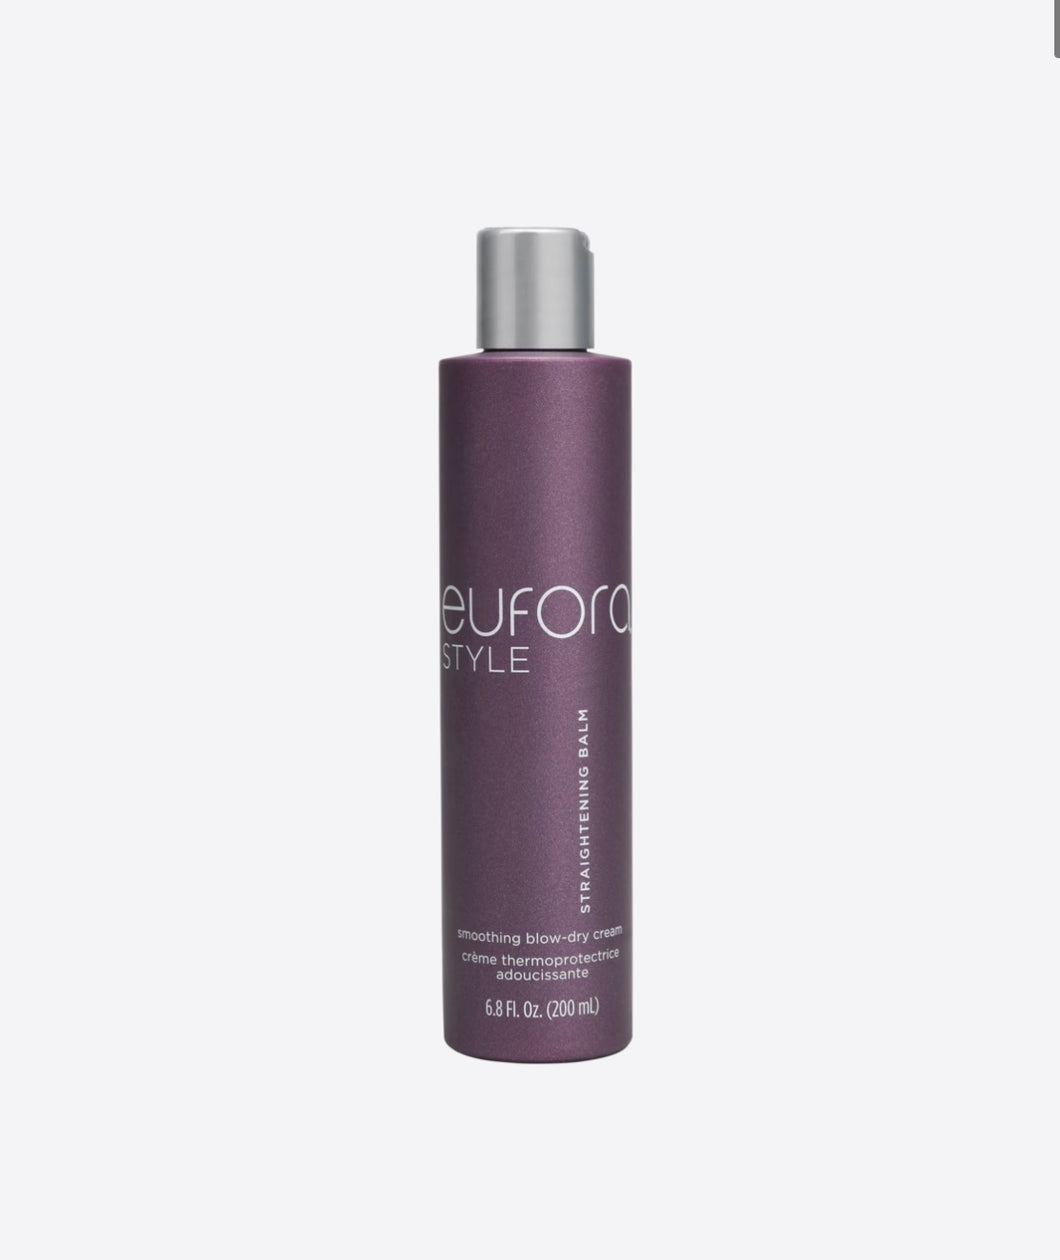 Eufora Straightening Balm is A dual-purpose blow-dry cream with exceptional leave-in conditioning benefits. provides lasting smooth and shiny results with excellent frizz protection. Straightens and smoothes frizzy, curly, and wavy hair with staying power. Hair is soft and moveable without a stiff or tacky feeling.